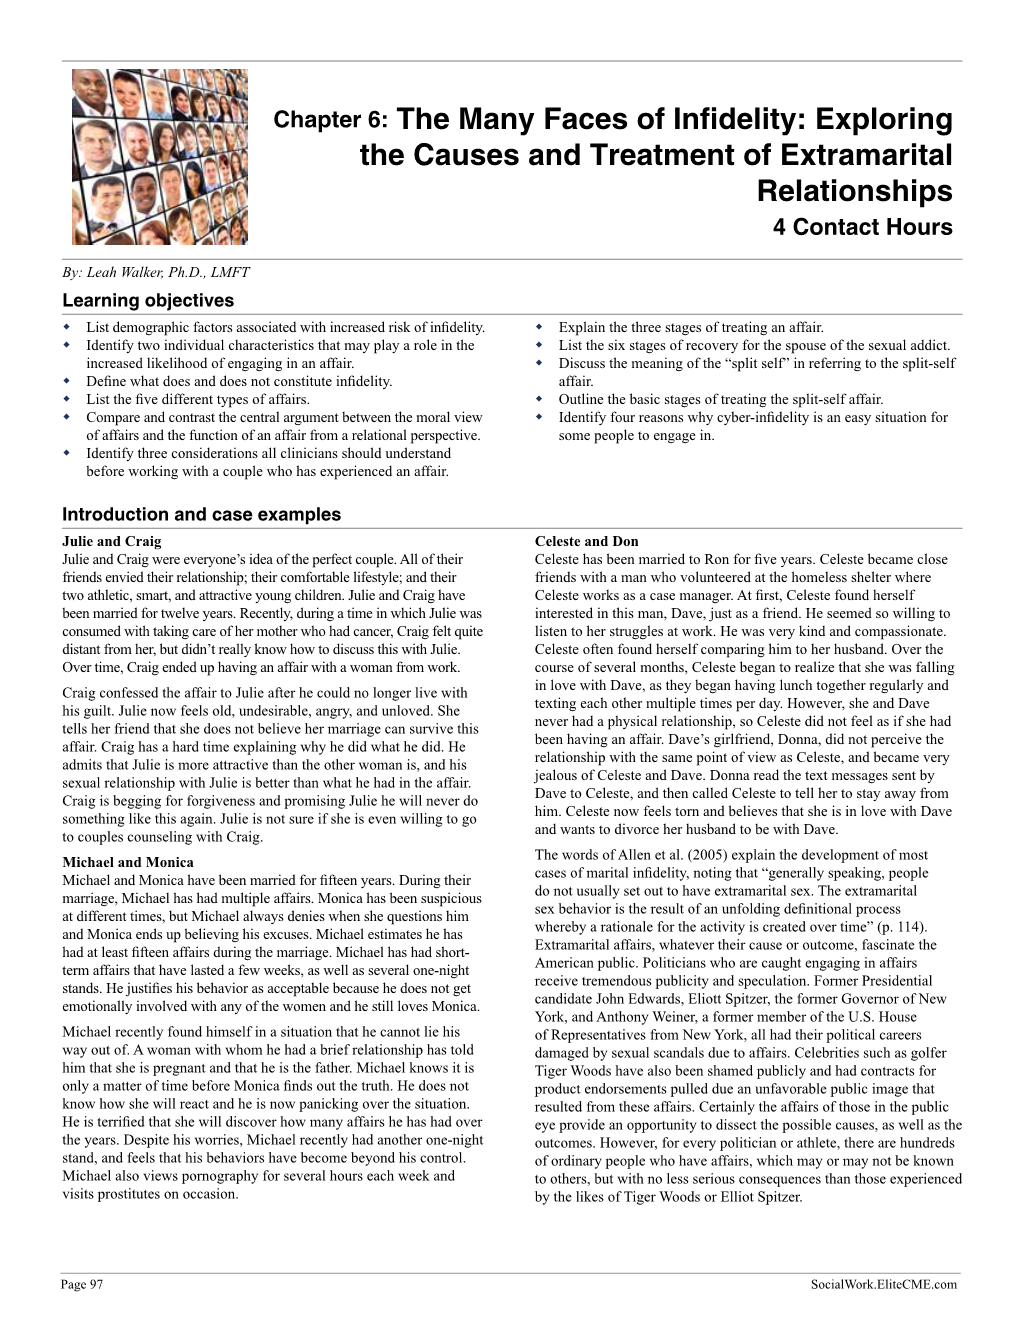 Exploring the Causes and Treatment of Extramarital Relationships 4 Contact Hours